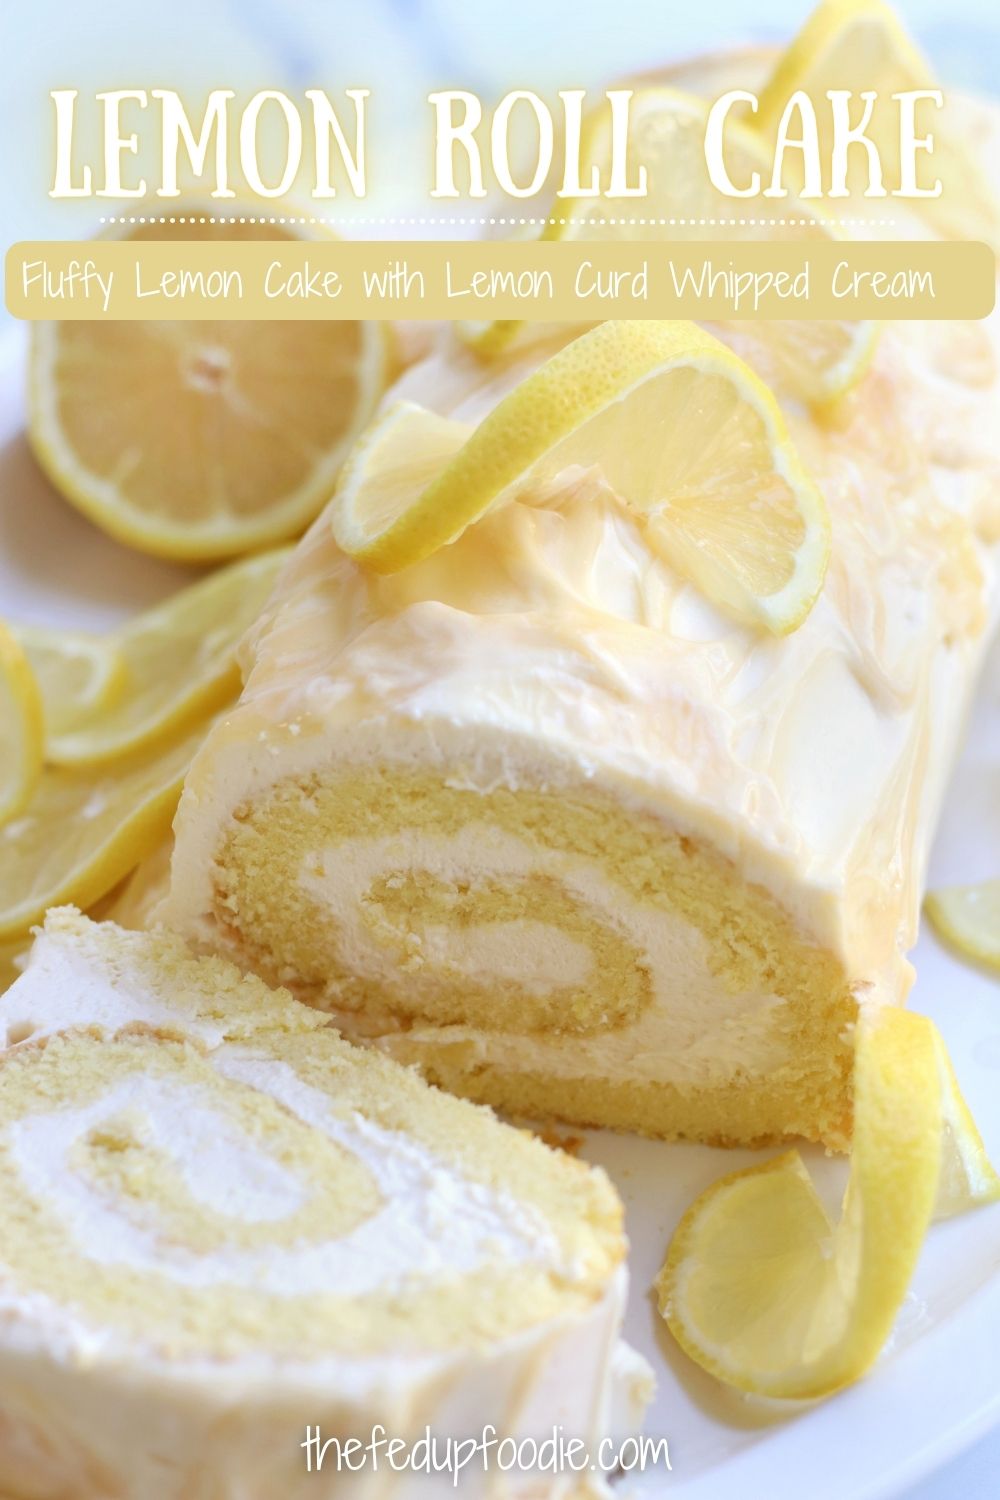 Bright and fluffy with a creamy lemon curd and whipped cream filling, this Lemon Roll Cake is easy to make and adored by many. My husband calls this cake heavenly bites of sheer goodness. It makes a wonderful Easter dessert or a refreshing treat for a summer party.
#LemonRollCake #LemonRollCakeRecipe #LemonCakeRollWithLemonCurd #LemonSwissRoll #LemonSwissRollCake #WhatToDoWithLemonCurd #LemonRoulade #LemonJellyRollCake